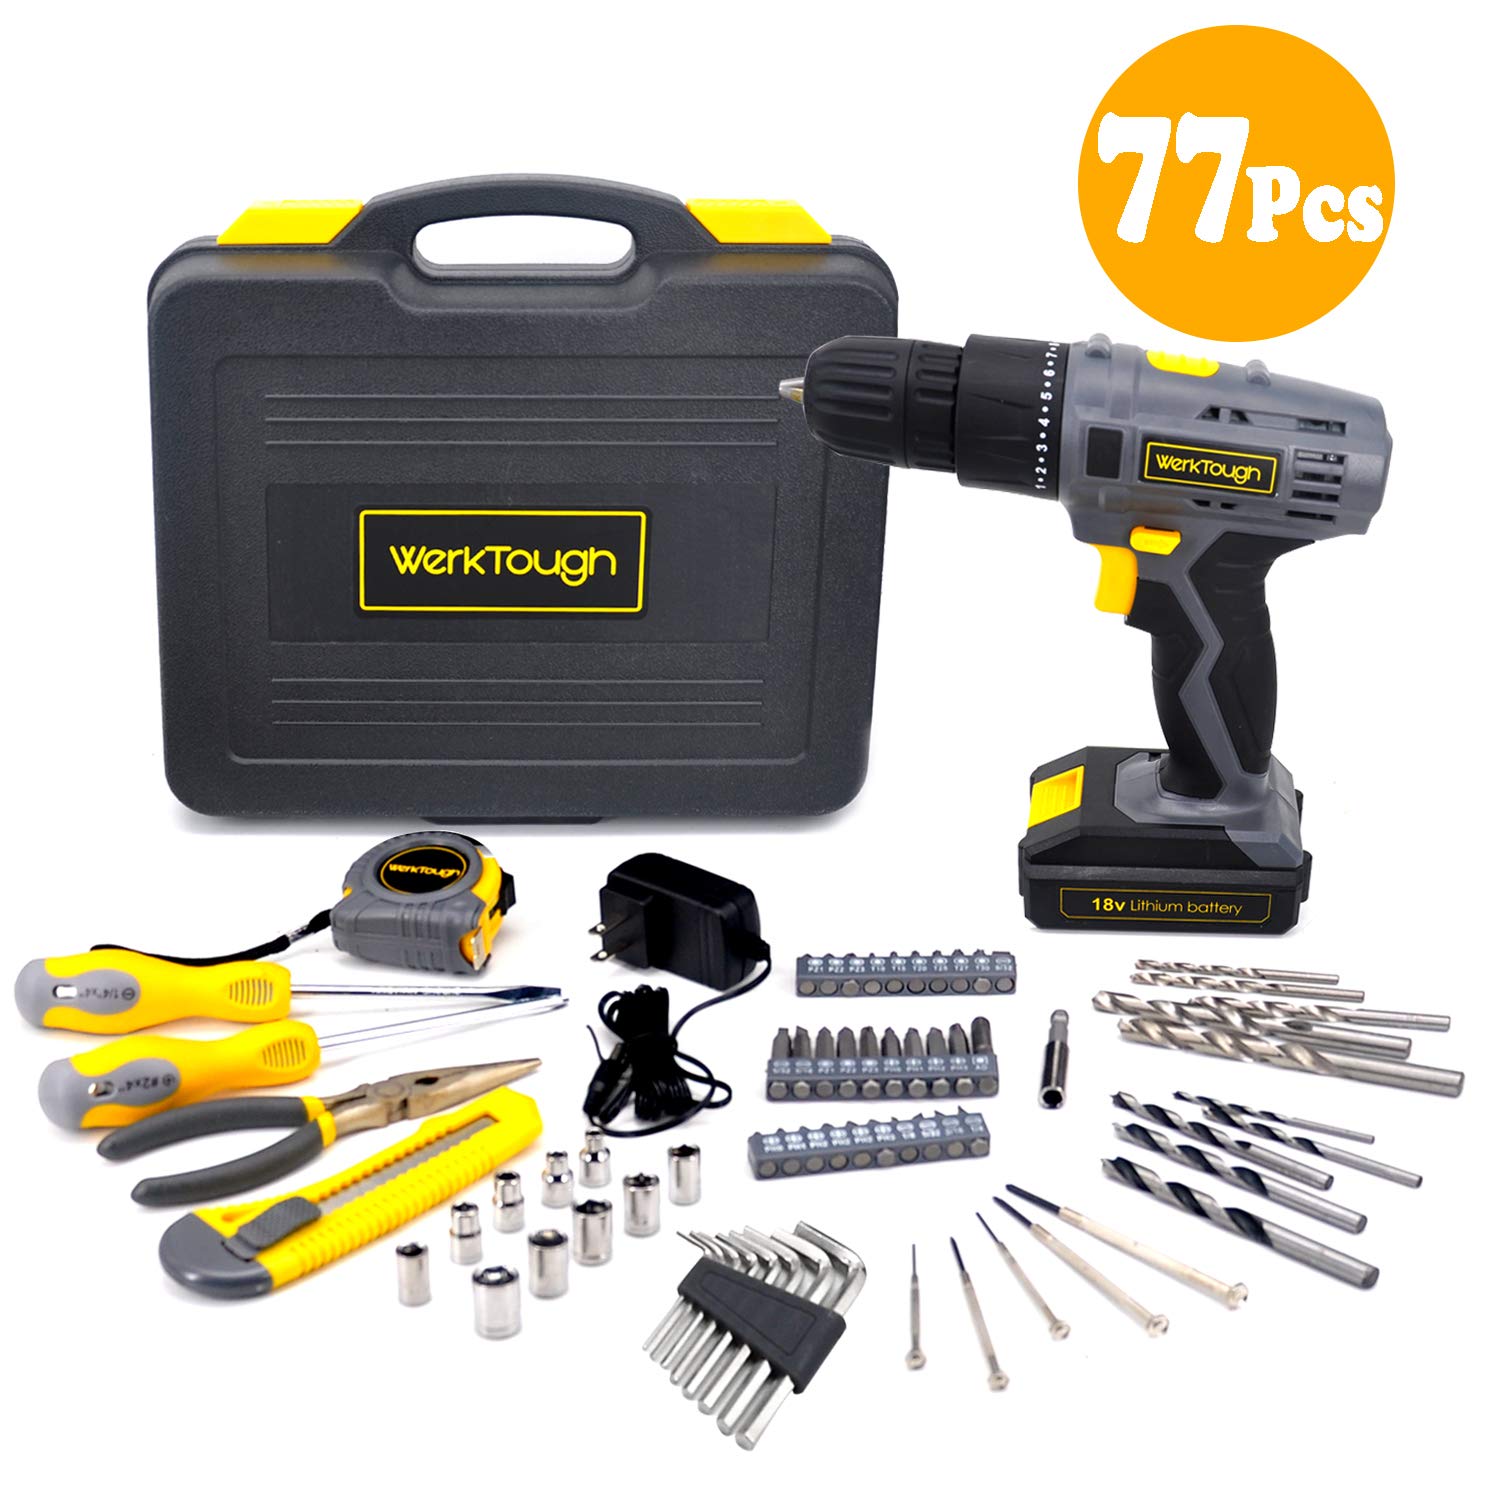 Werktough 77PCS 18/20V Cordless Drill Screwdriver Tool Set in Toolbox Storage Case Tool Kit Home Repair Set Father Day Gift Box Combo Kit Home Improvements